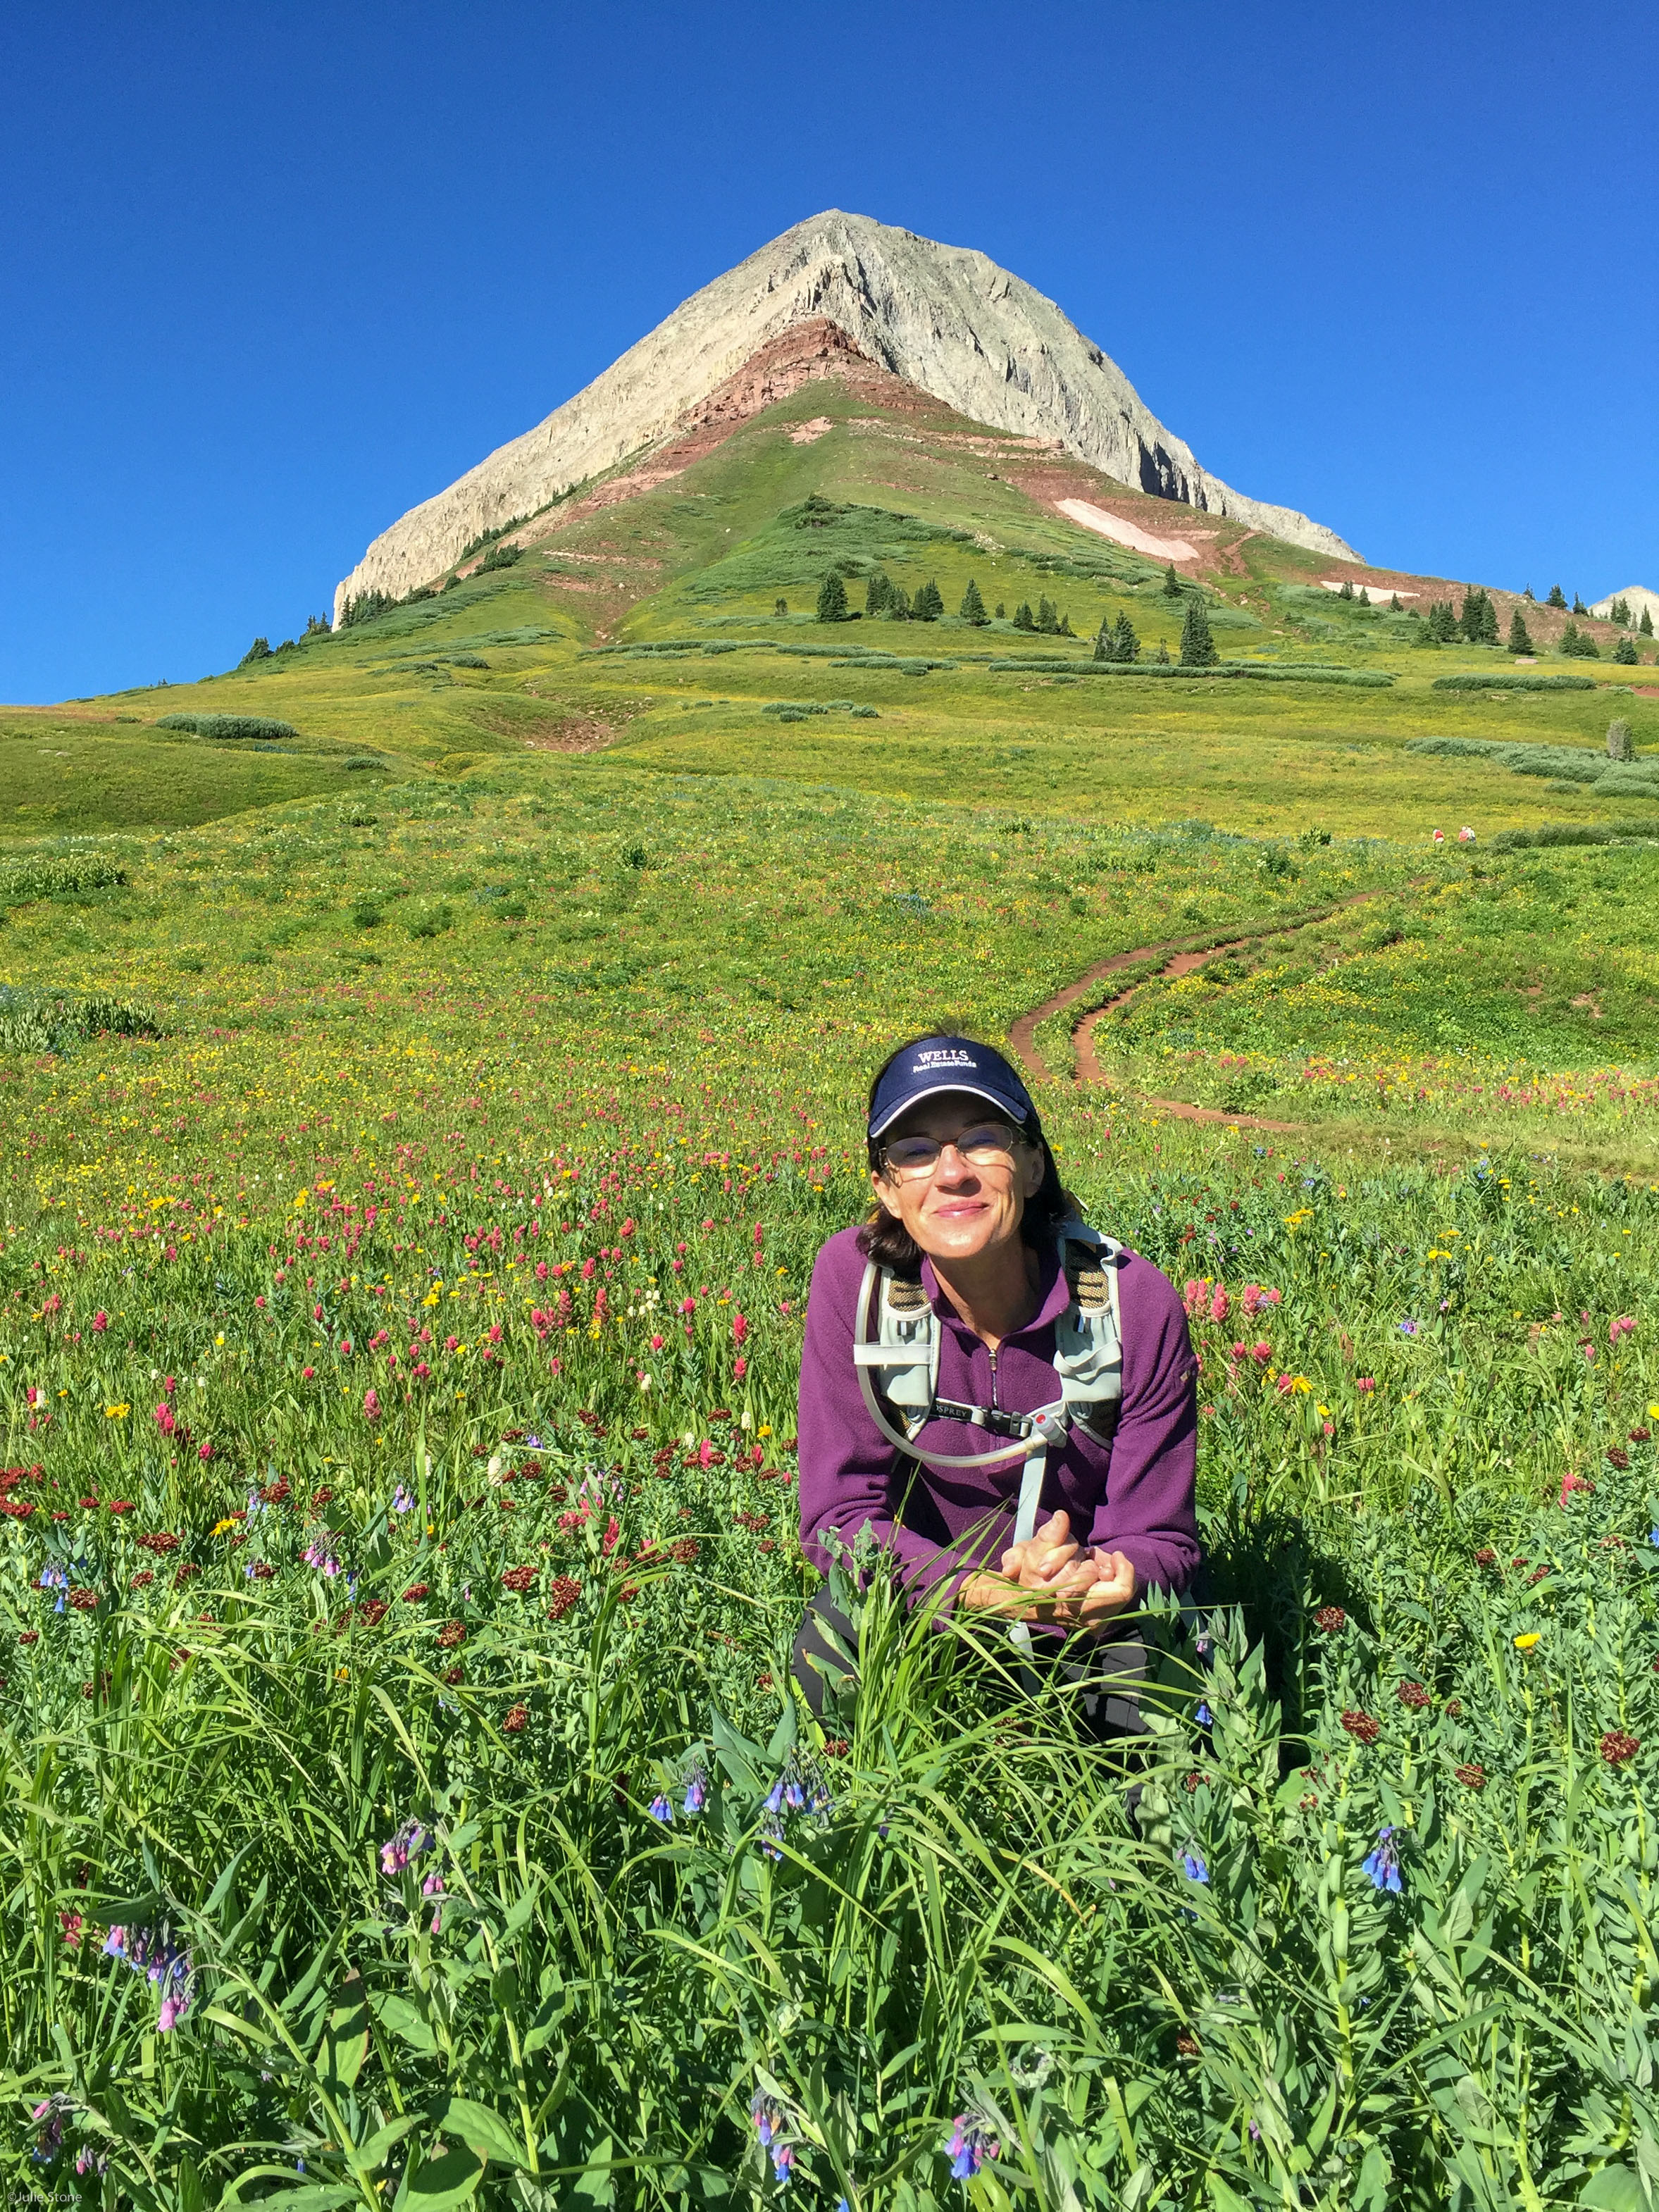 "Hi Marcie.  We are waiting for you to join us on our hikes with these beautiful flowers."  Barbara Larson